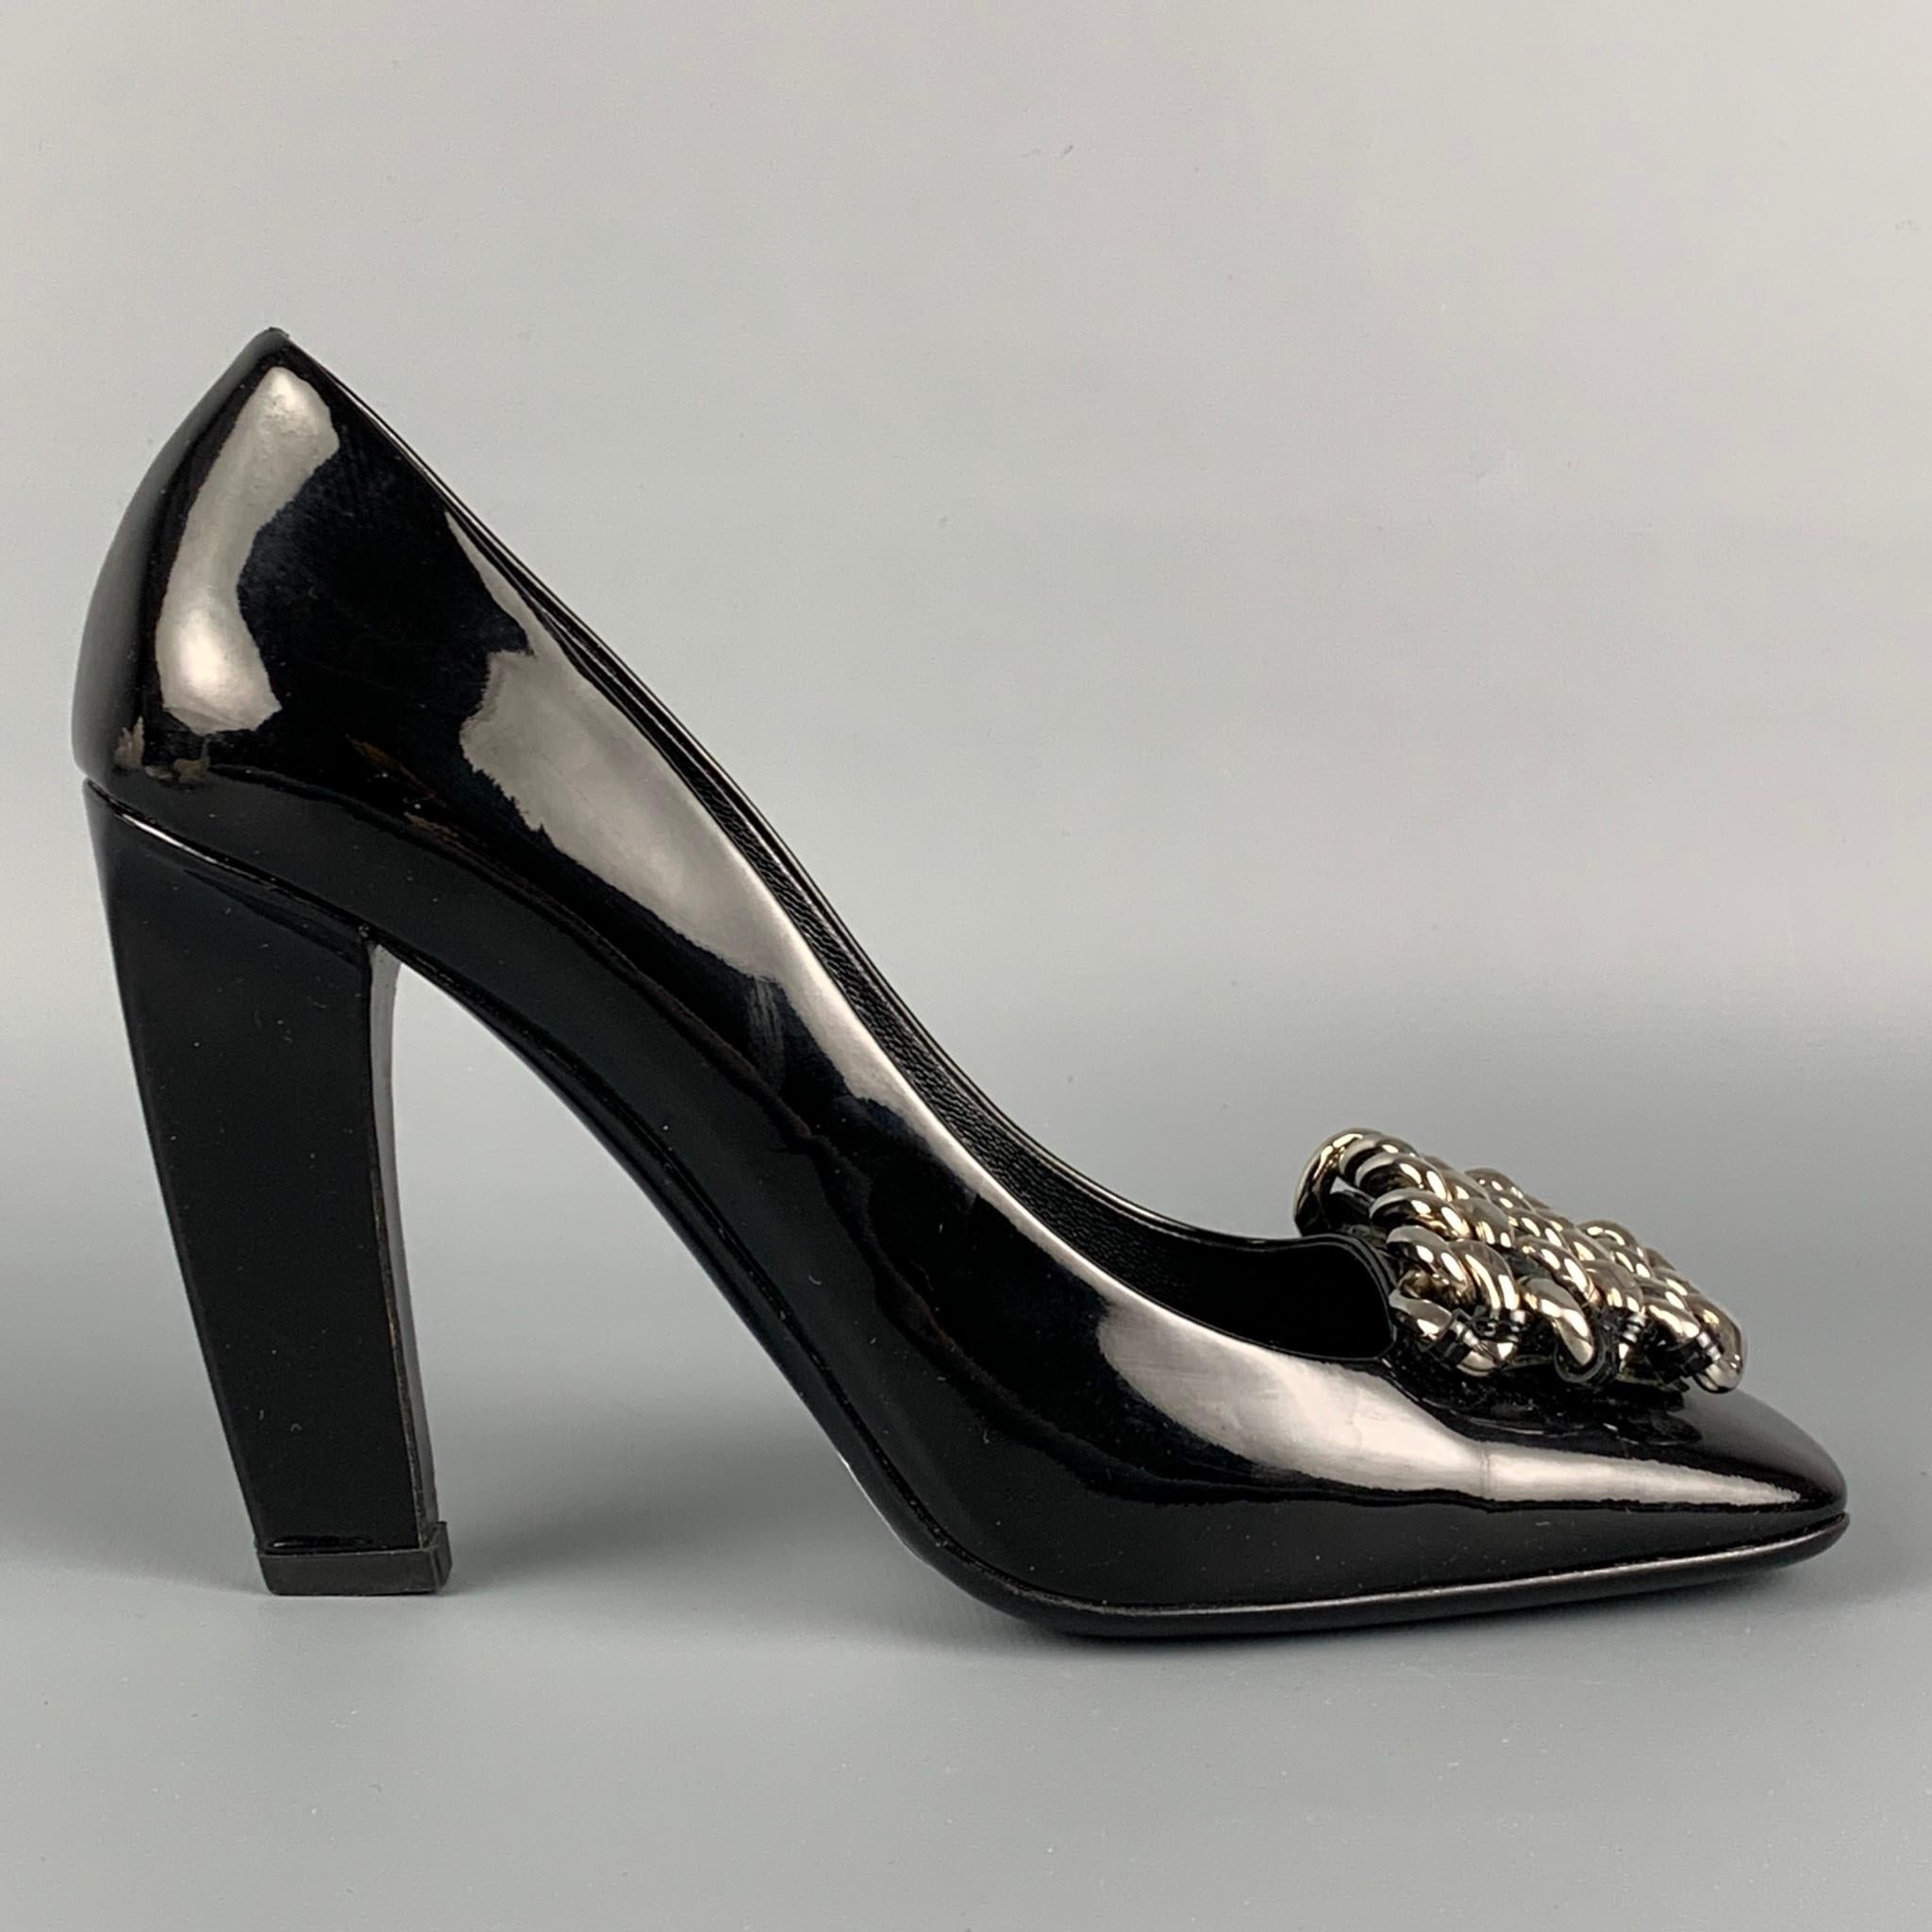 PRADA pumps comes in a black patent leather featuring a square toe, silver tone chain details, and a curved heel. Made in Italy. 

Very Good Pre-Owned Condition.
Marked: 37

Measurements:

Heel: 4 in. 